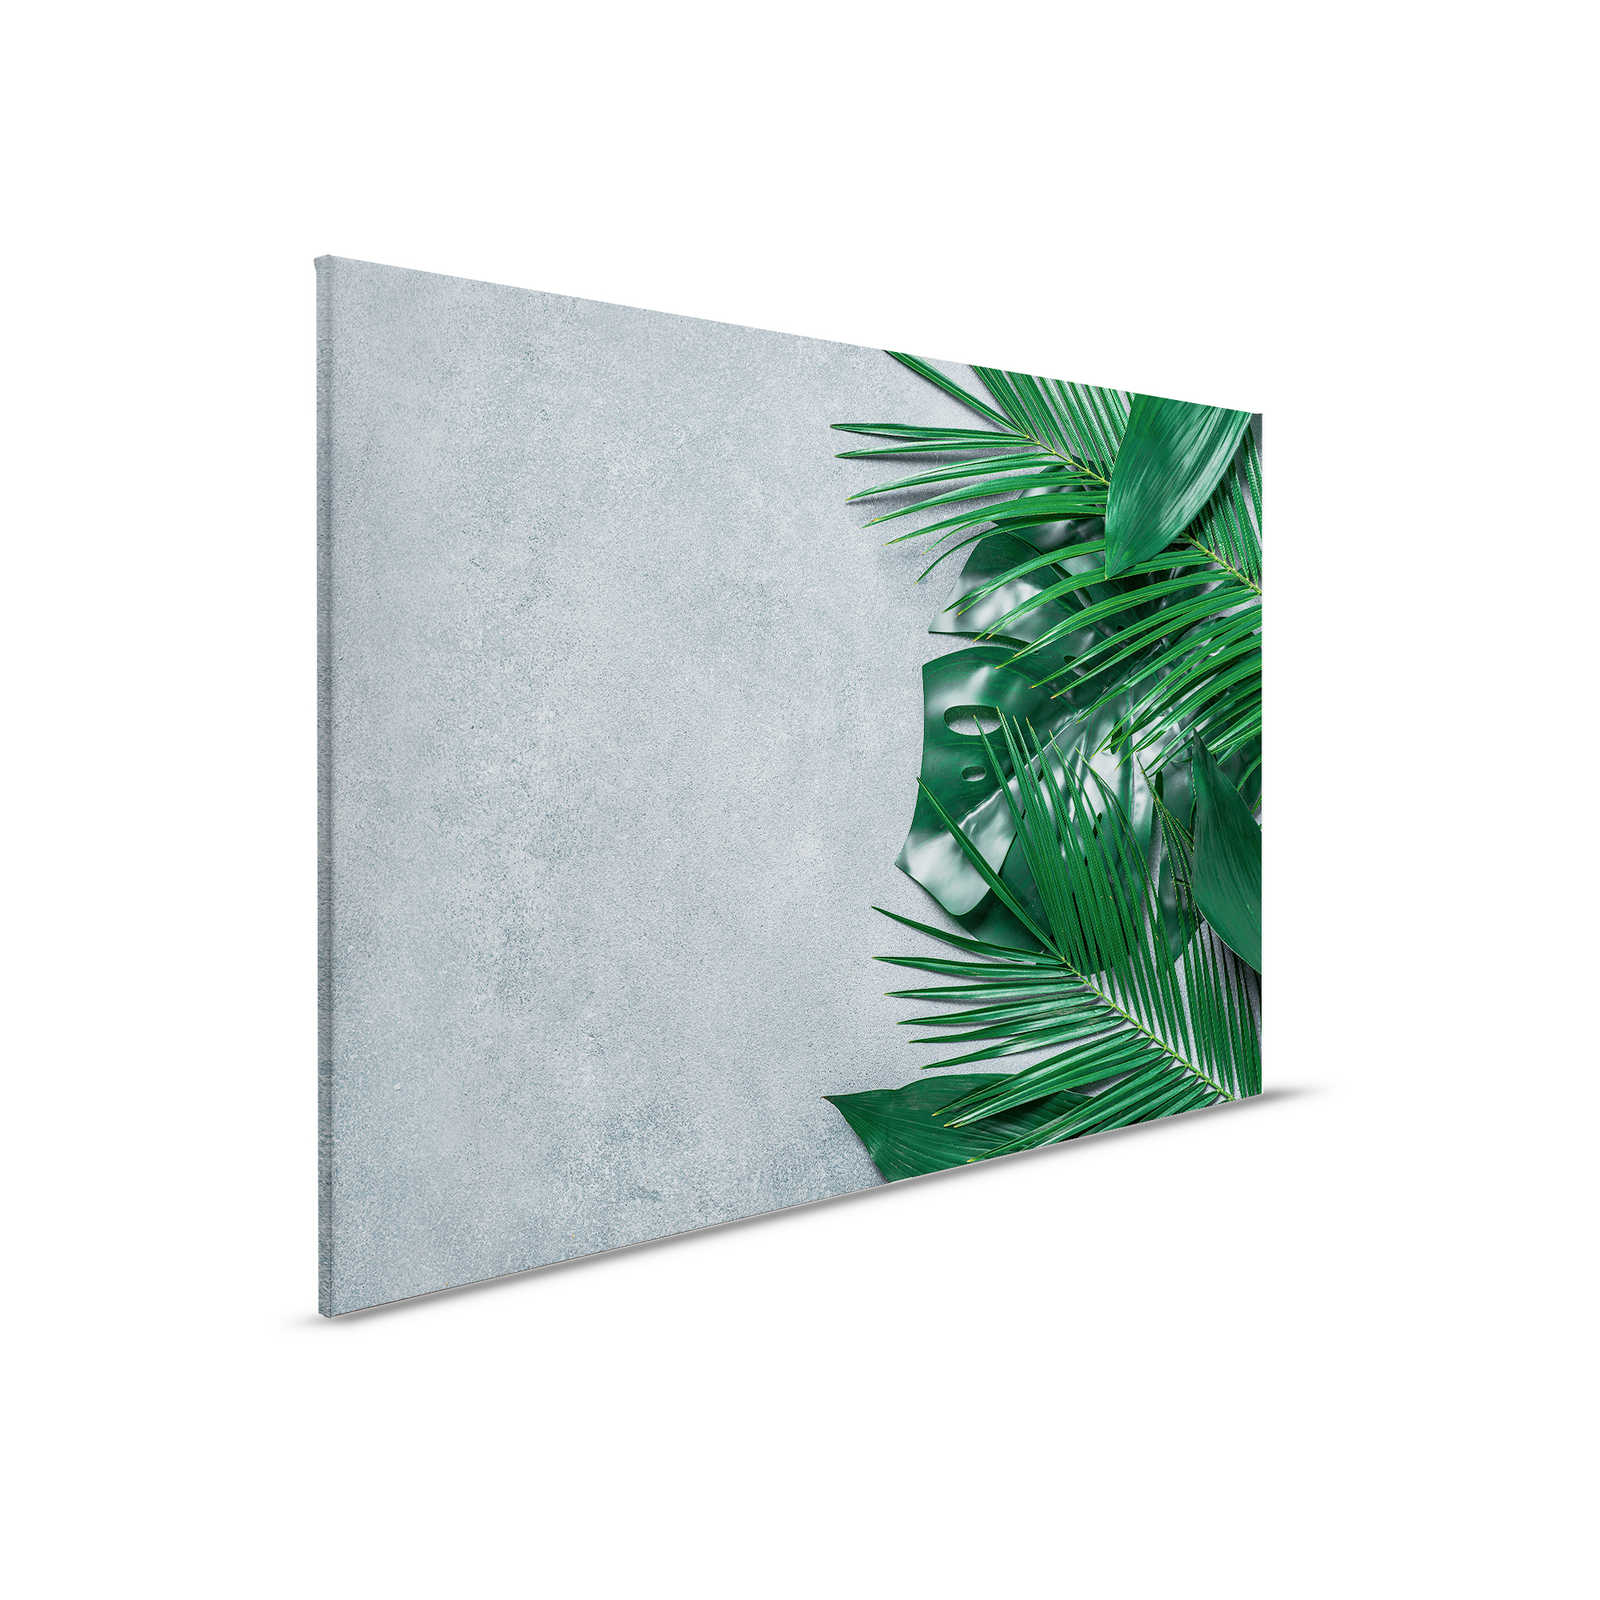         Canvas painting tropical leaves on concrete background - 0,90 m x 0,60 m
    